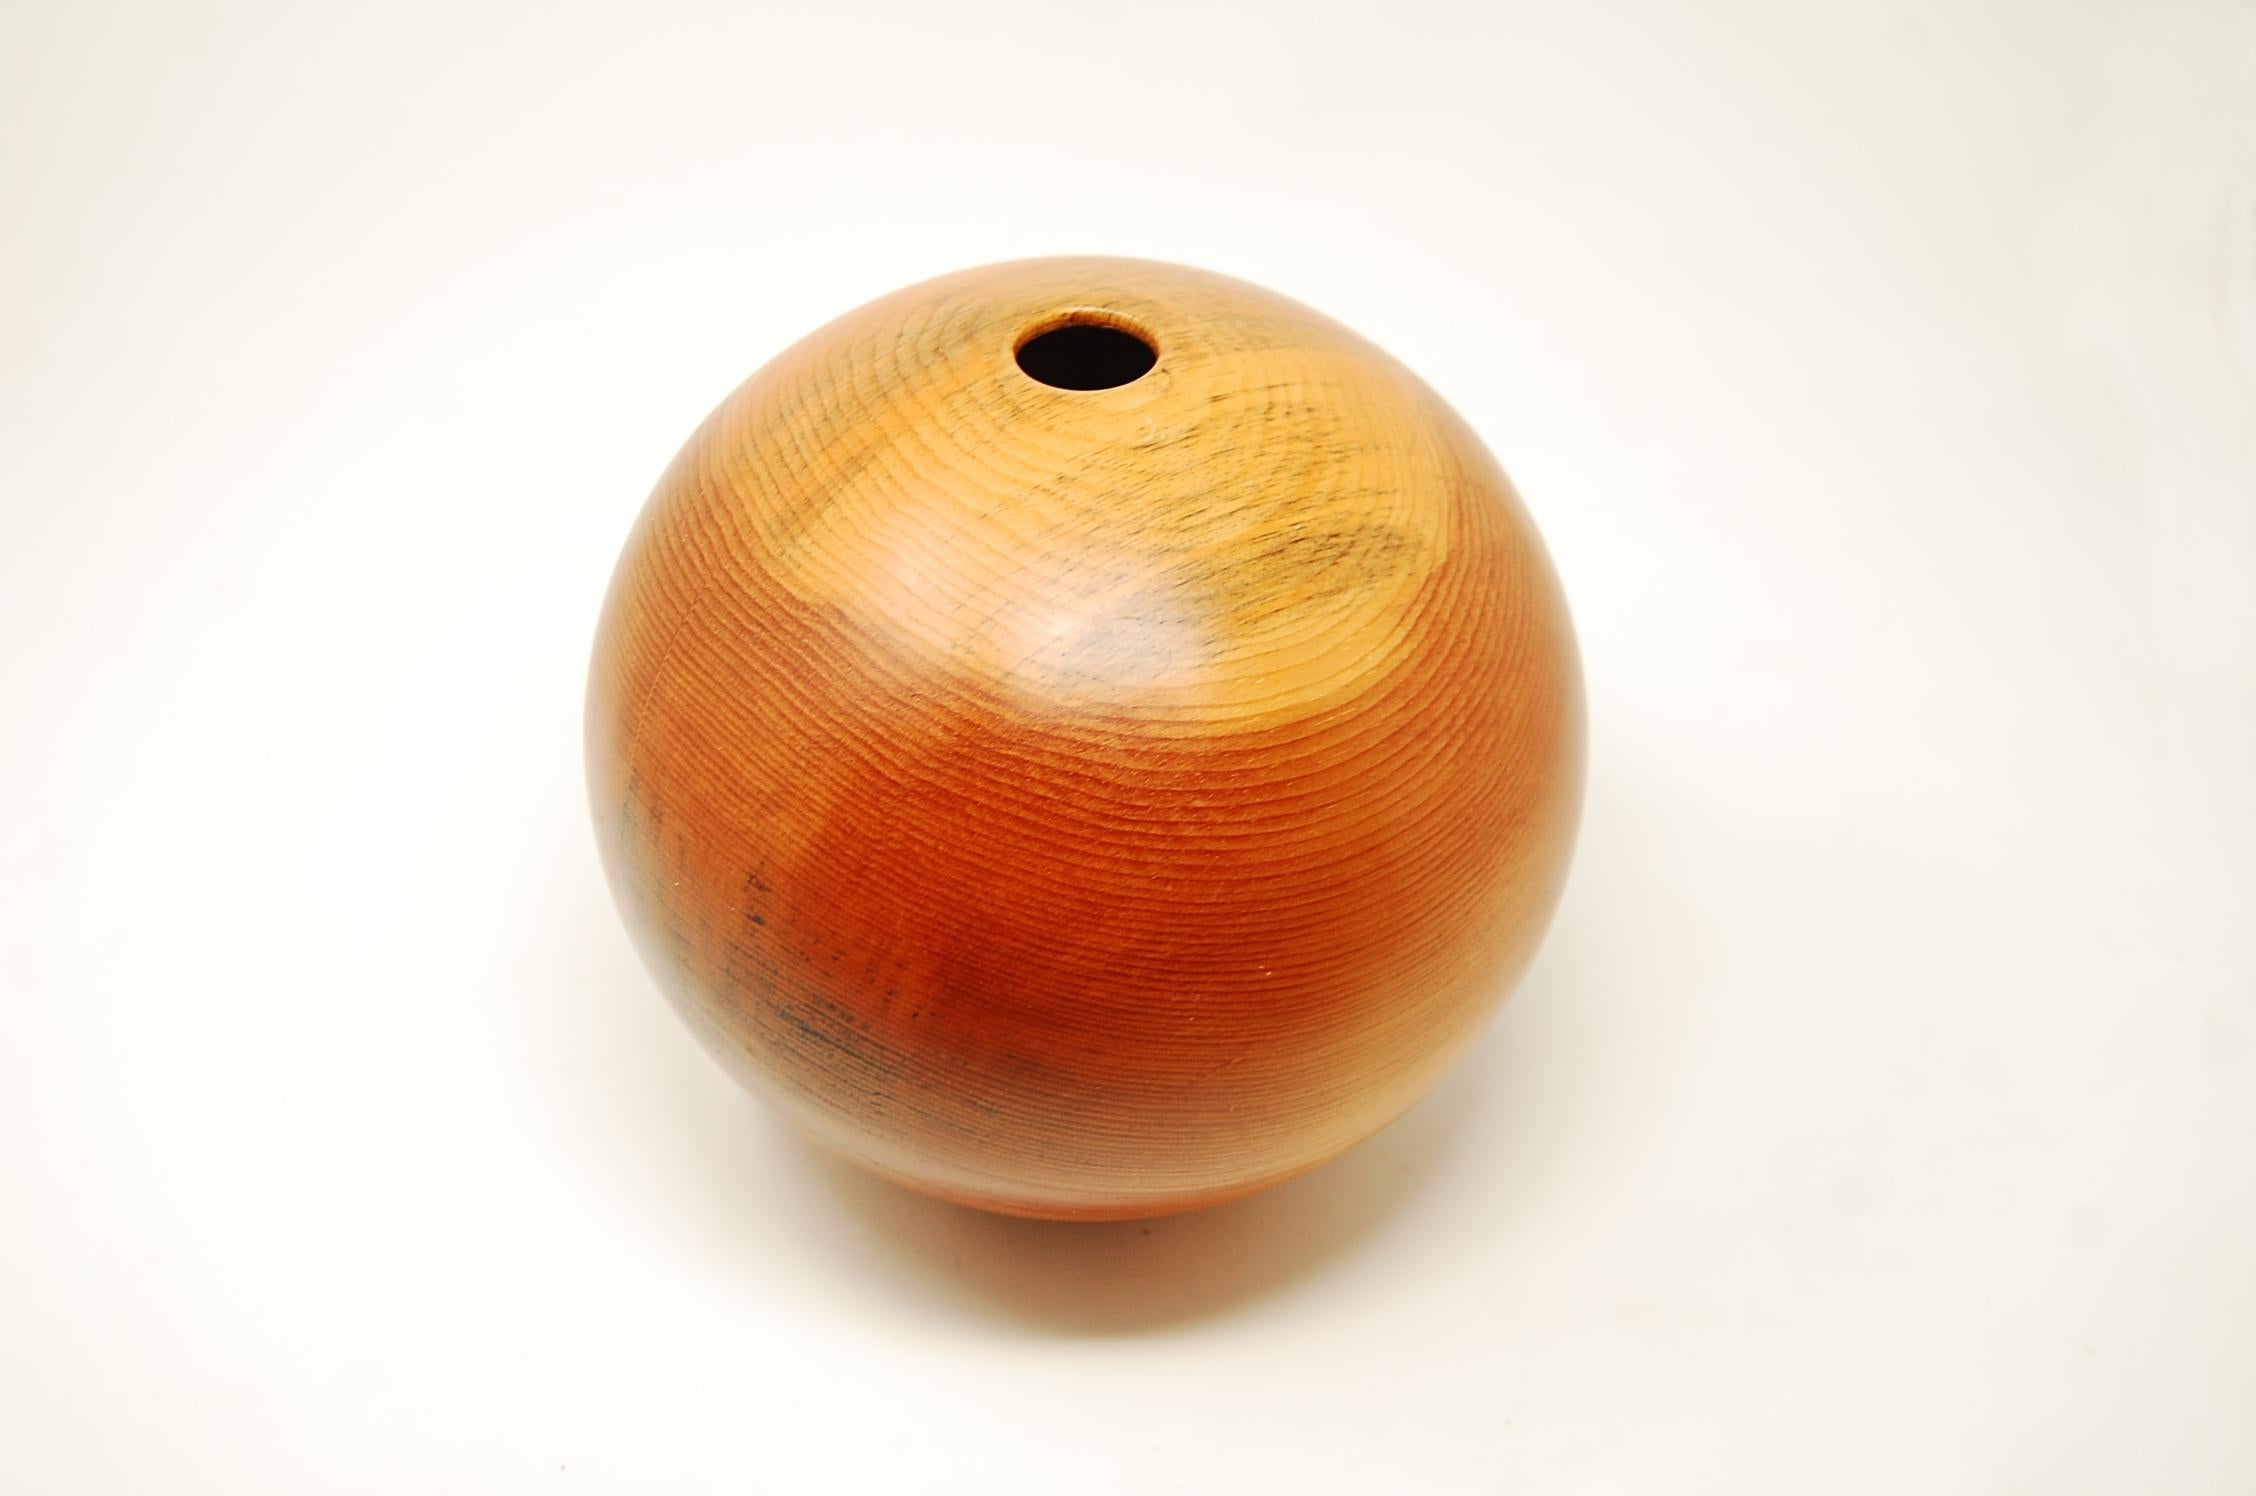 Hollow form vase in white pine by John Sage, circa 1997. Measures: Stands 8